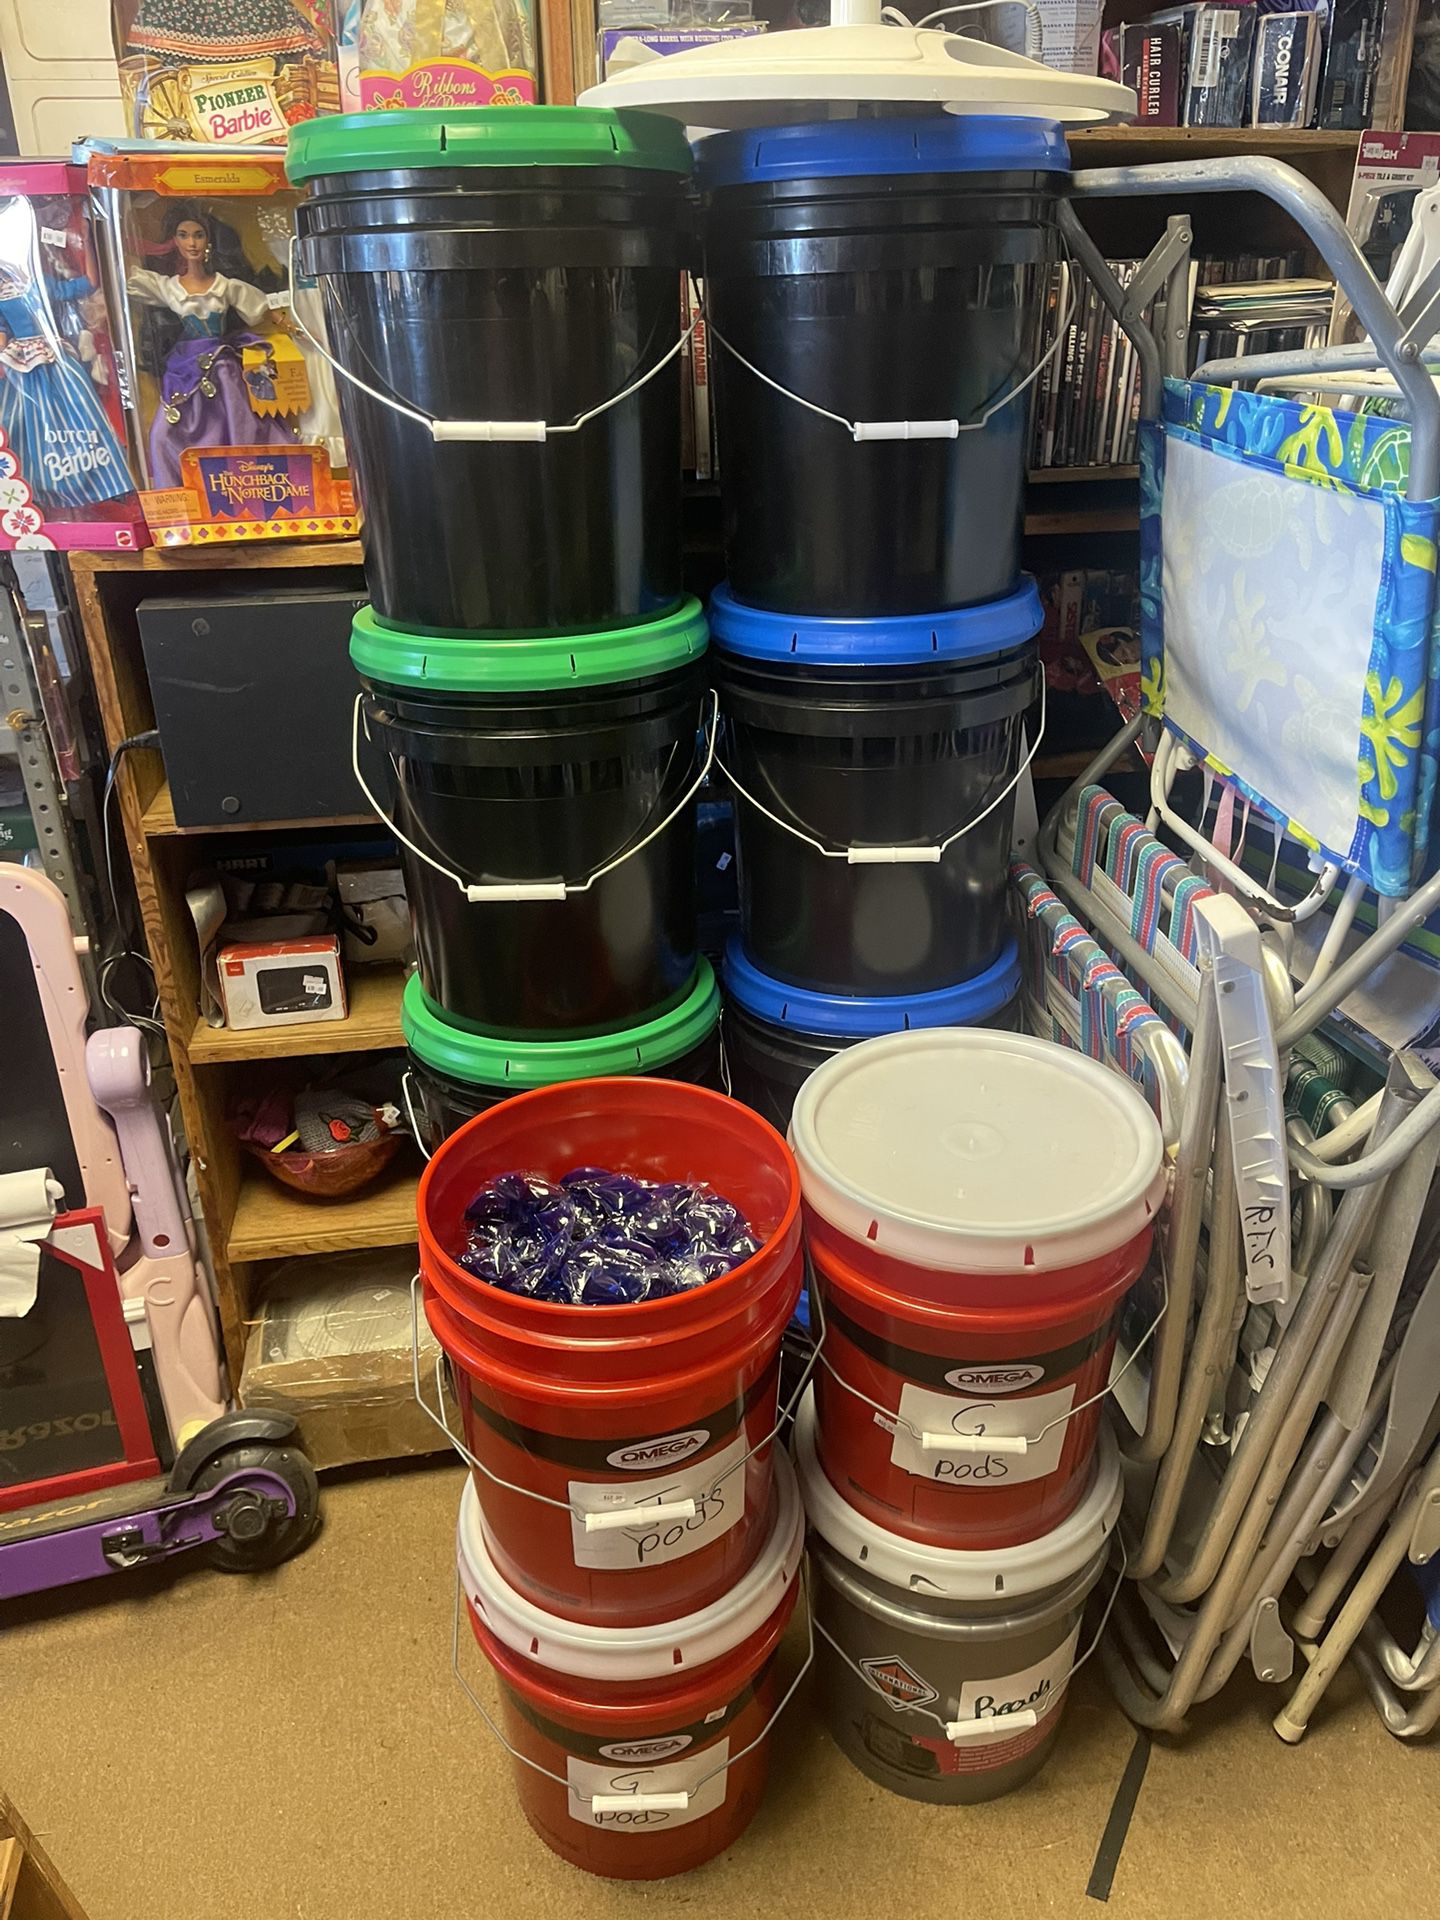 Toilet paper mega rolls 48pc box $40 laundry detergent 5 gallon buckets liquid $27 pods $60 beads $60 We have a large variety of stuff anything you lo